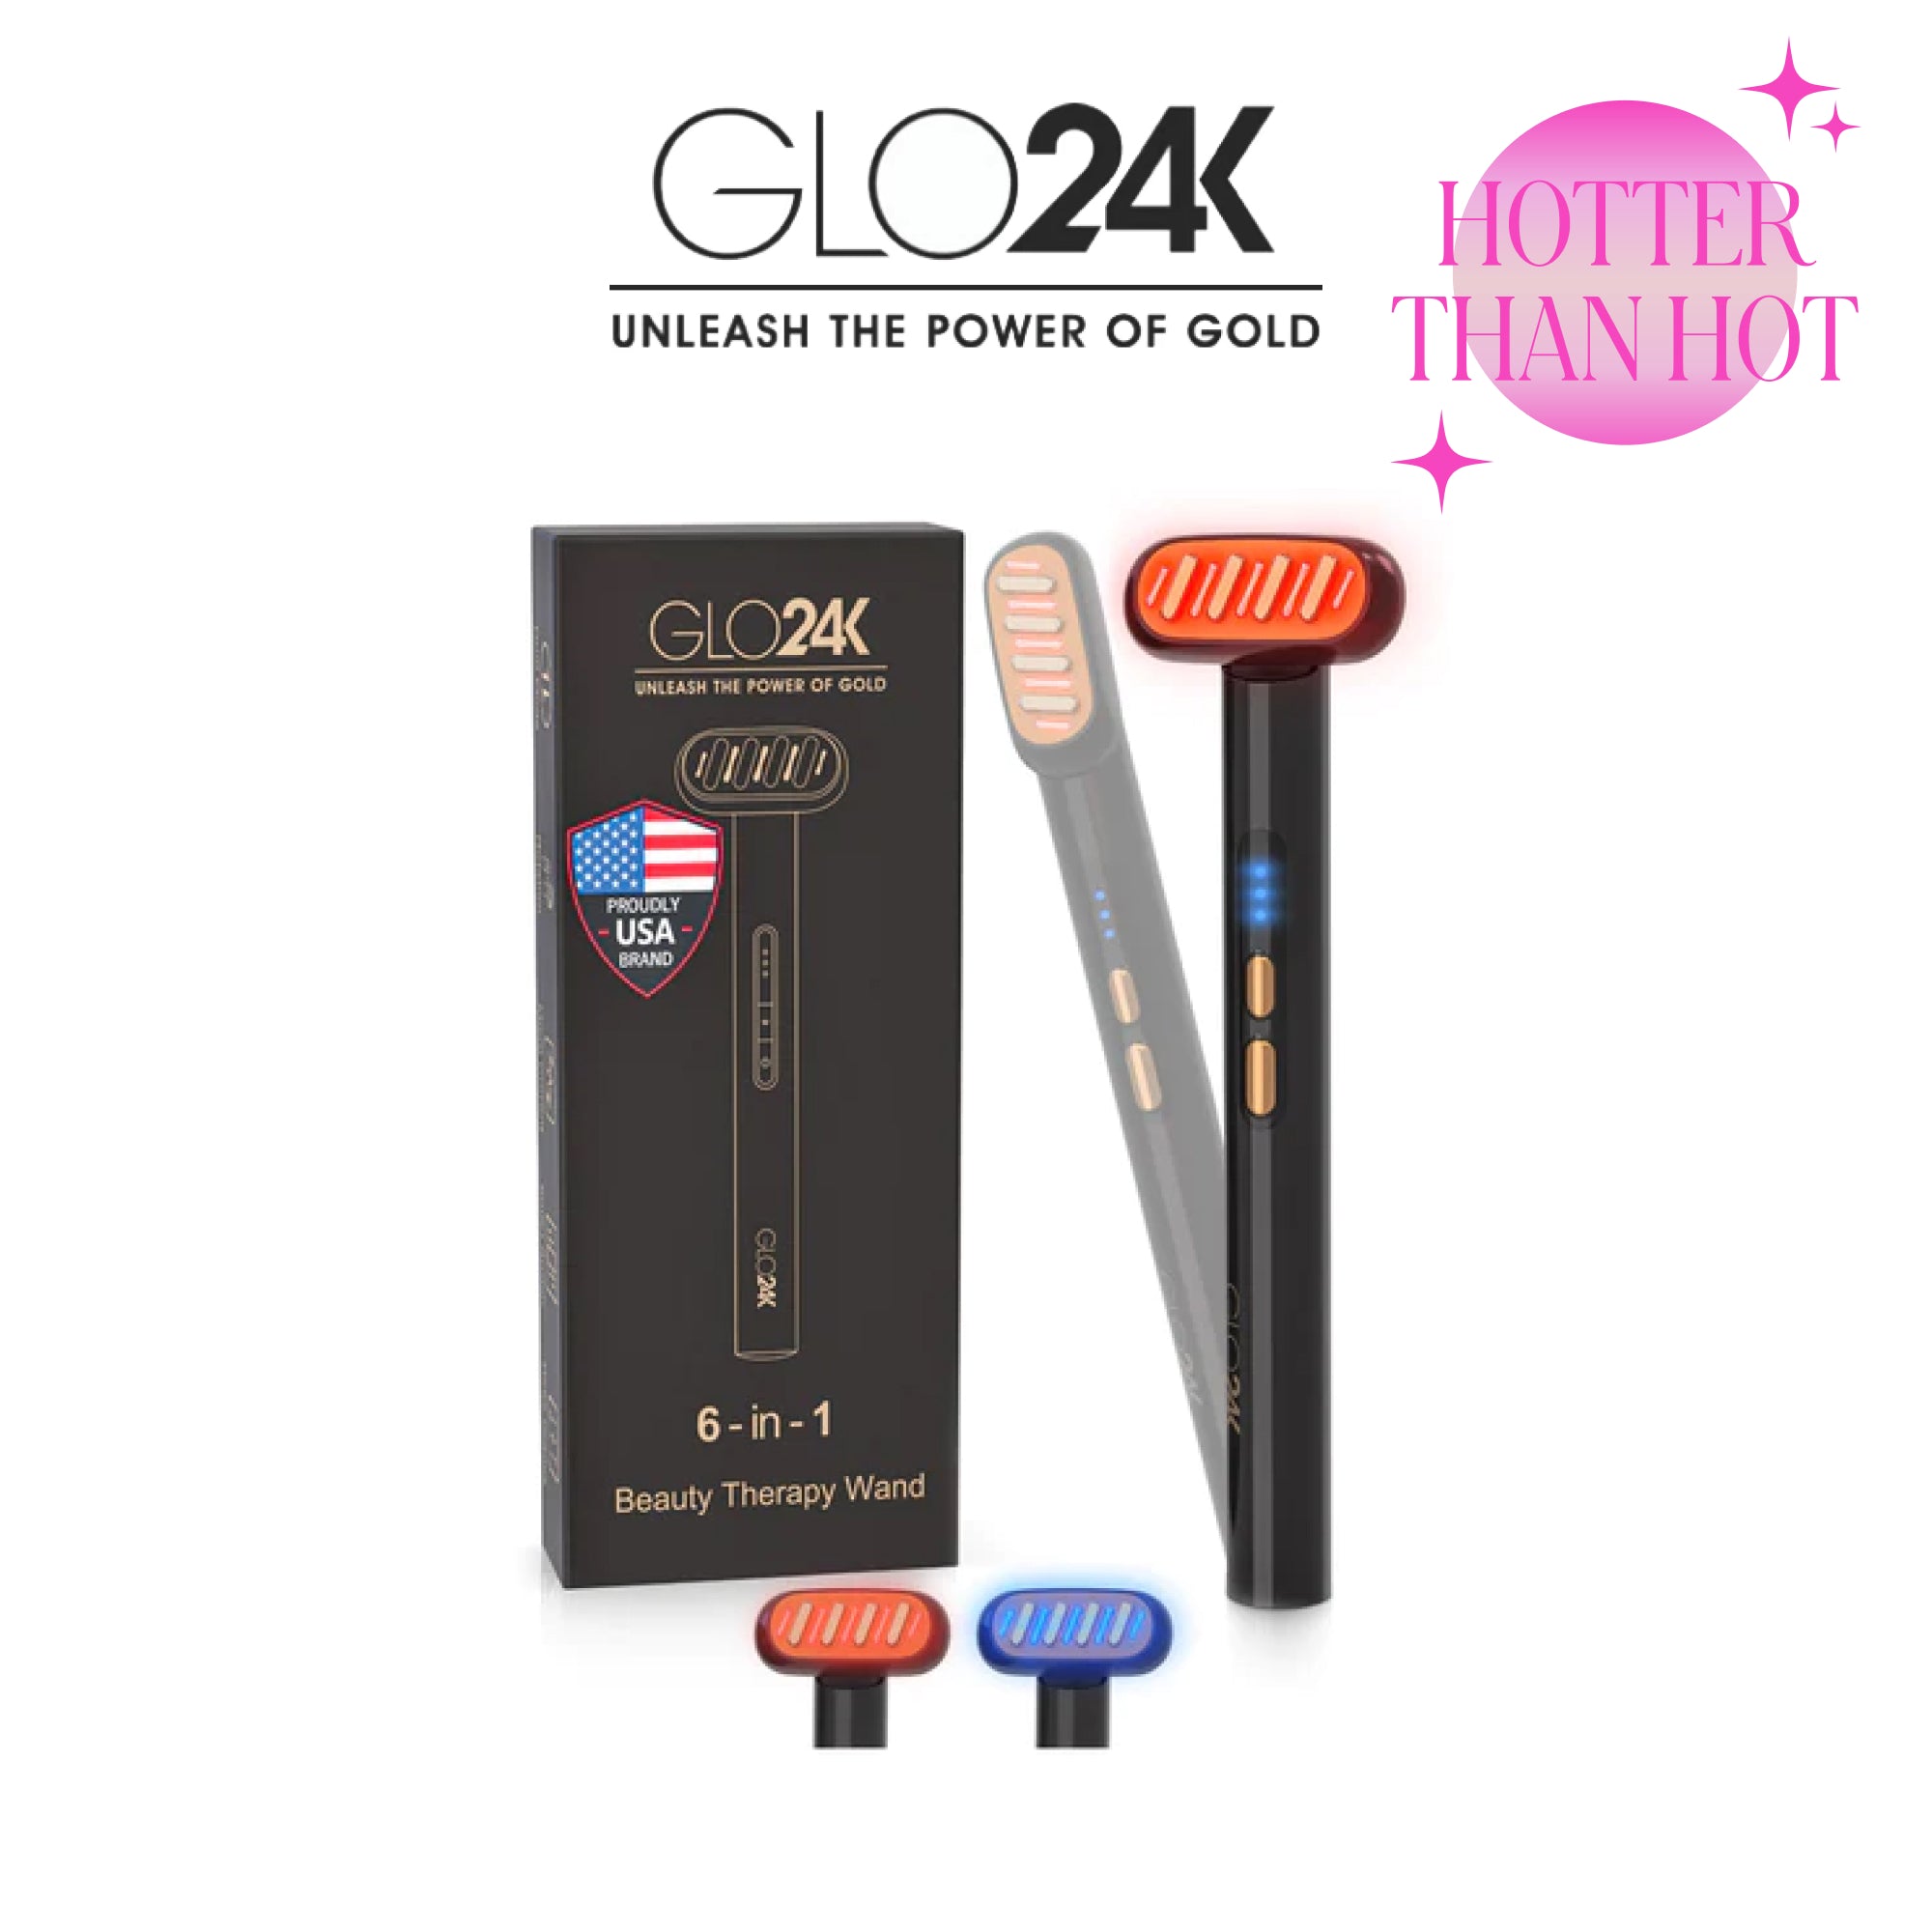 Glo24k - 6-in-1 Facial Therapy Wand